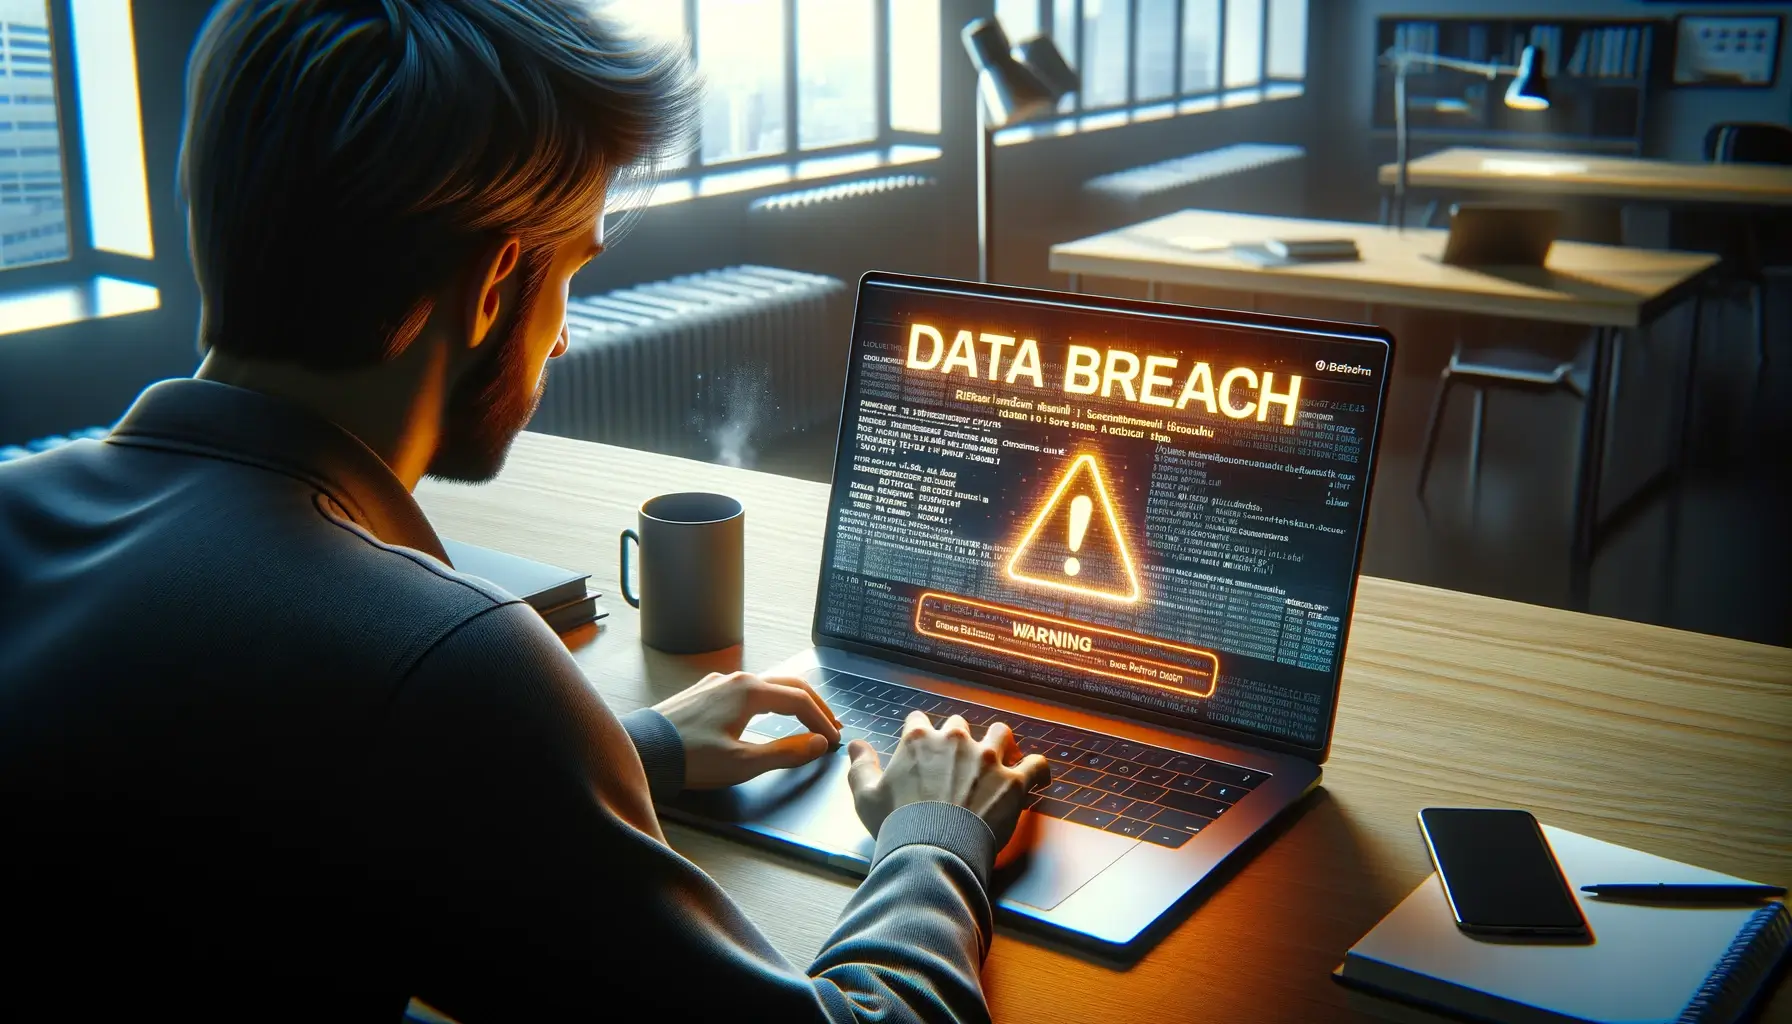 Recovering from a Data Breach